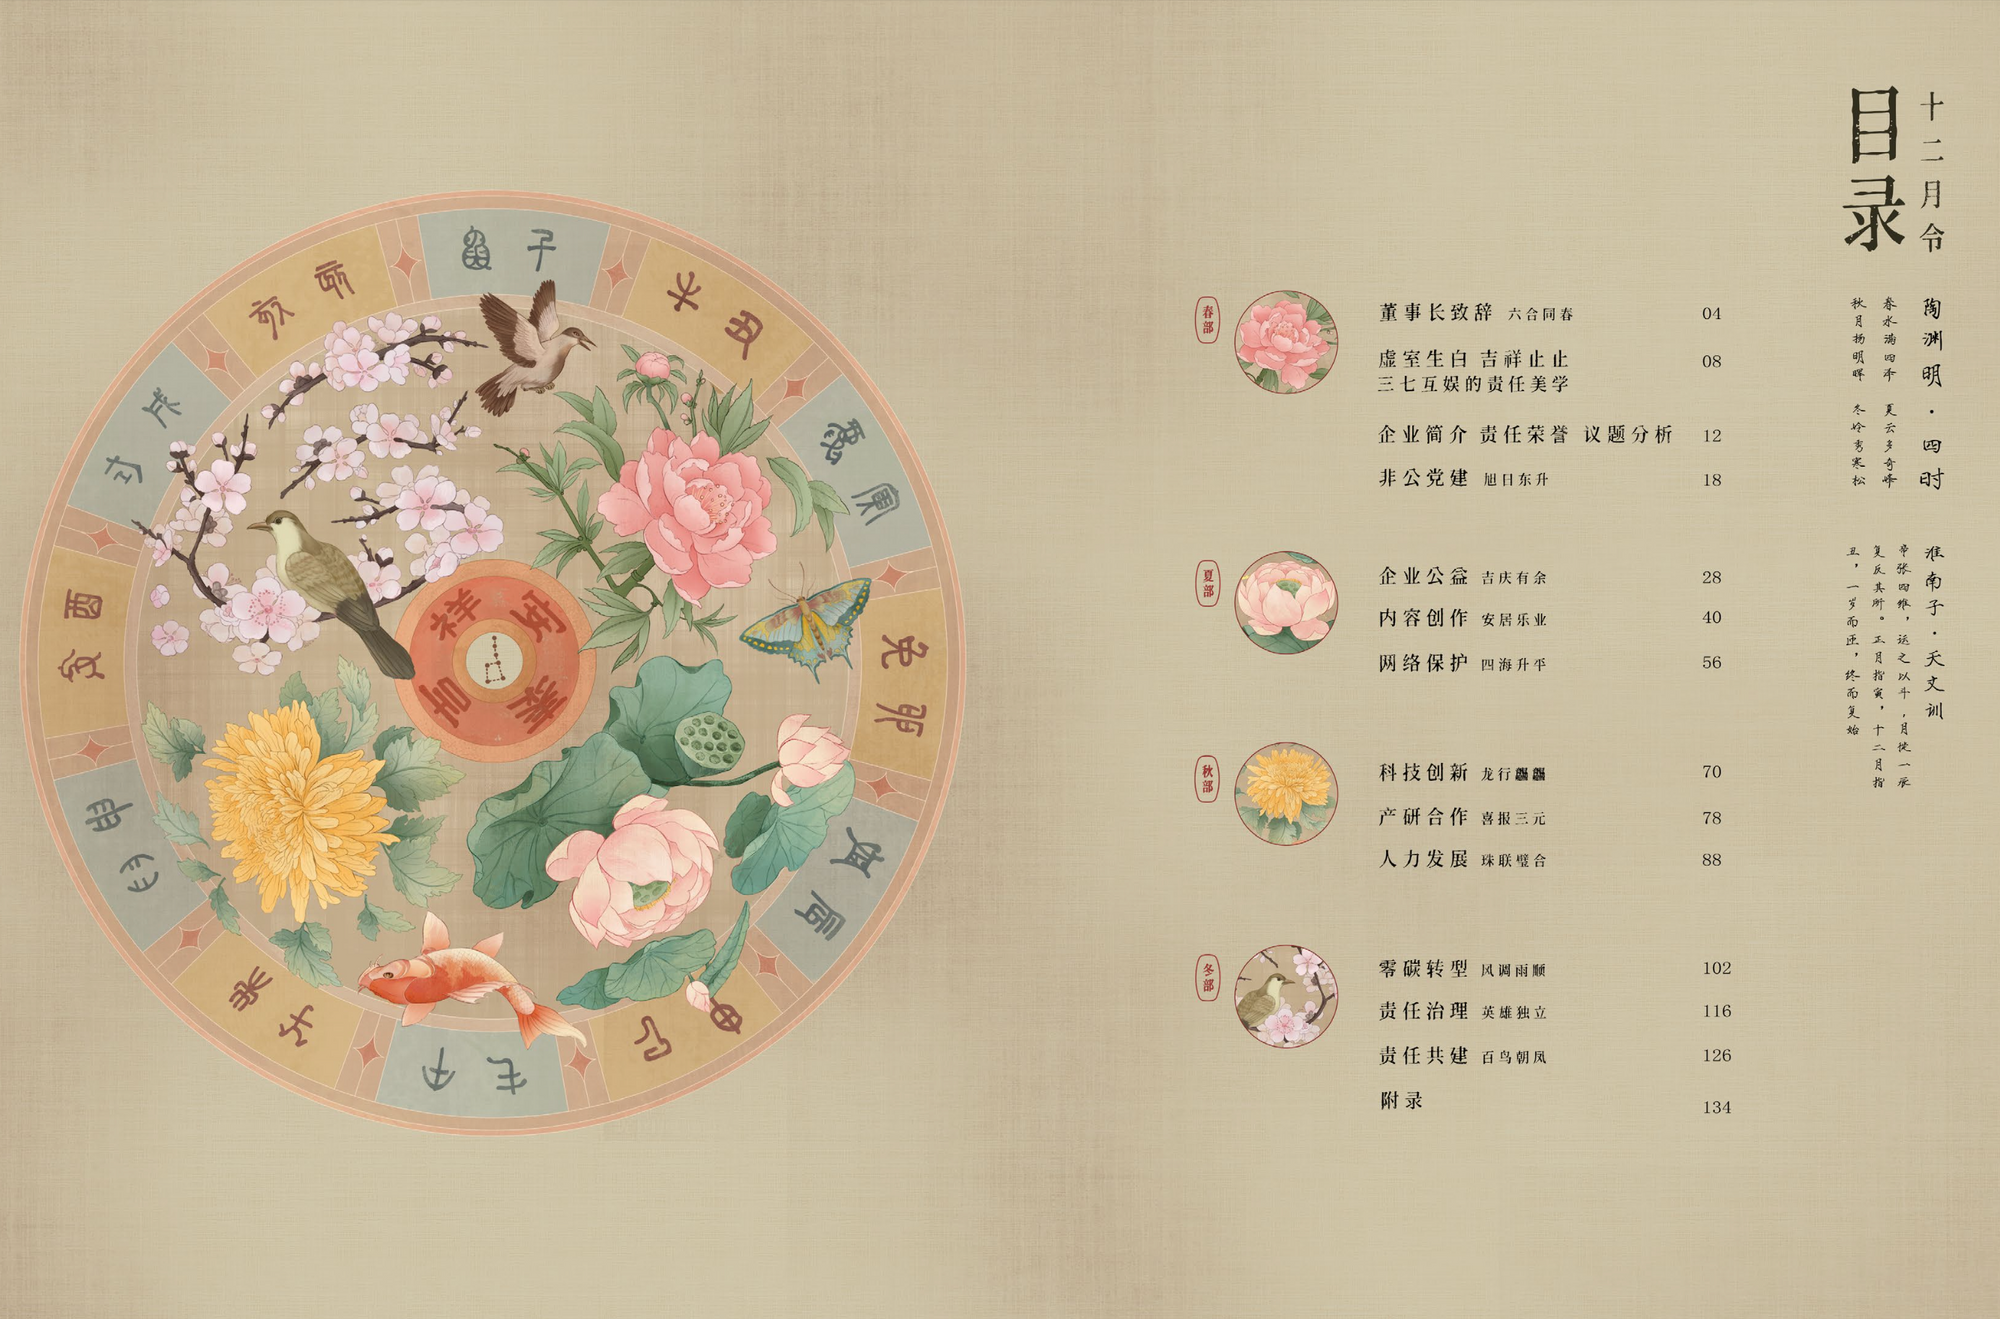 A circular wheel with chinese characters, birds, and flowers on the left, in front of a tan background.